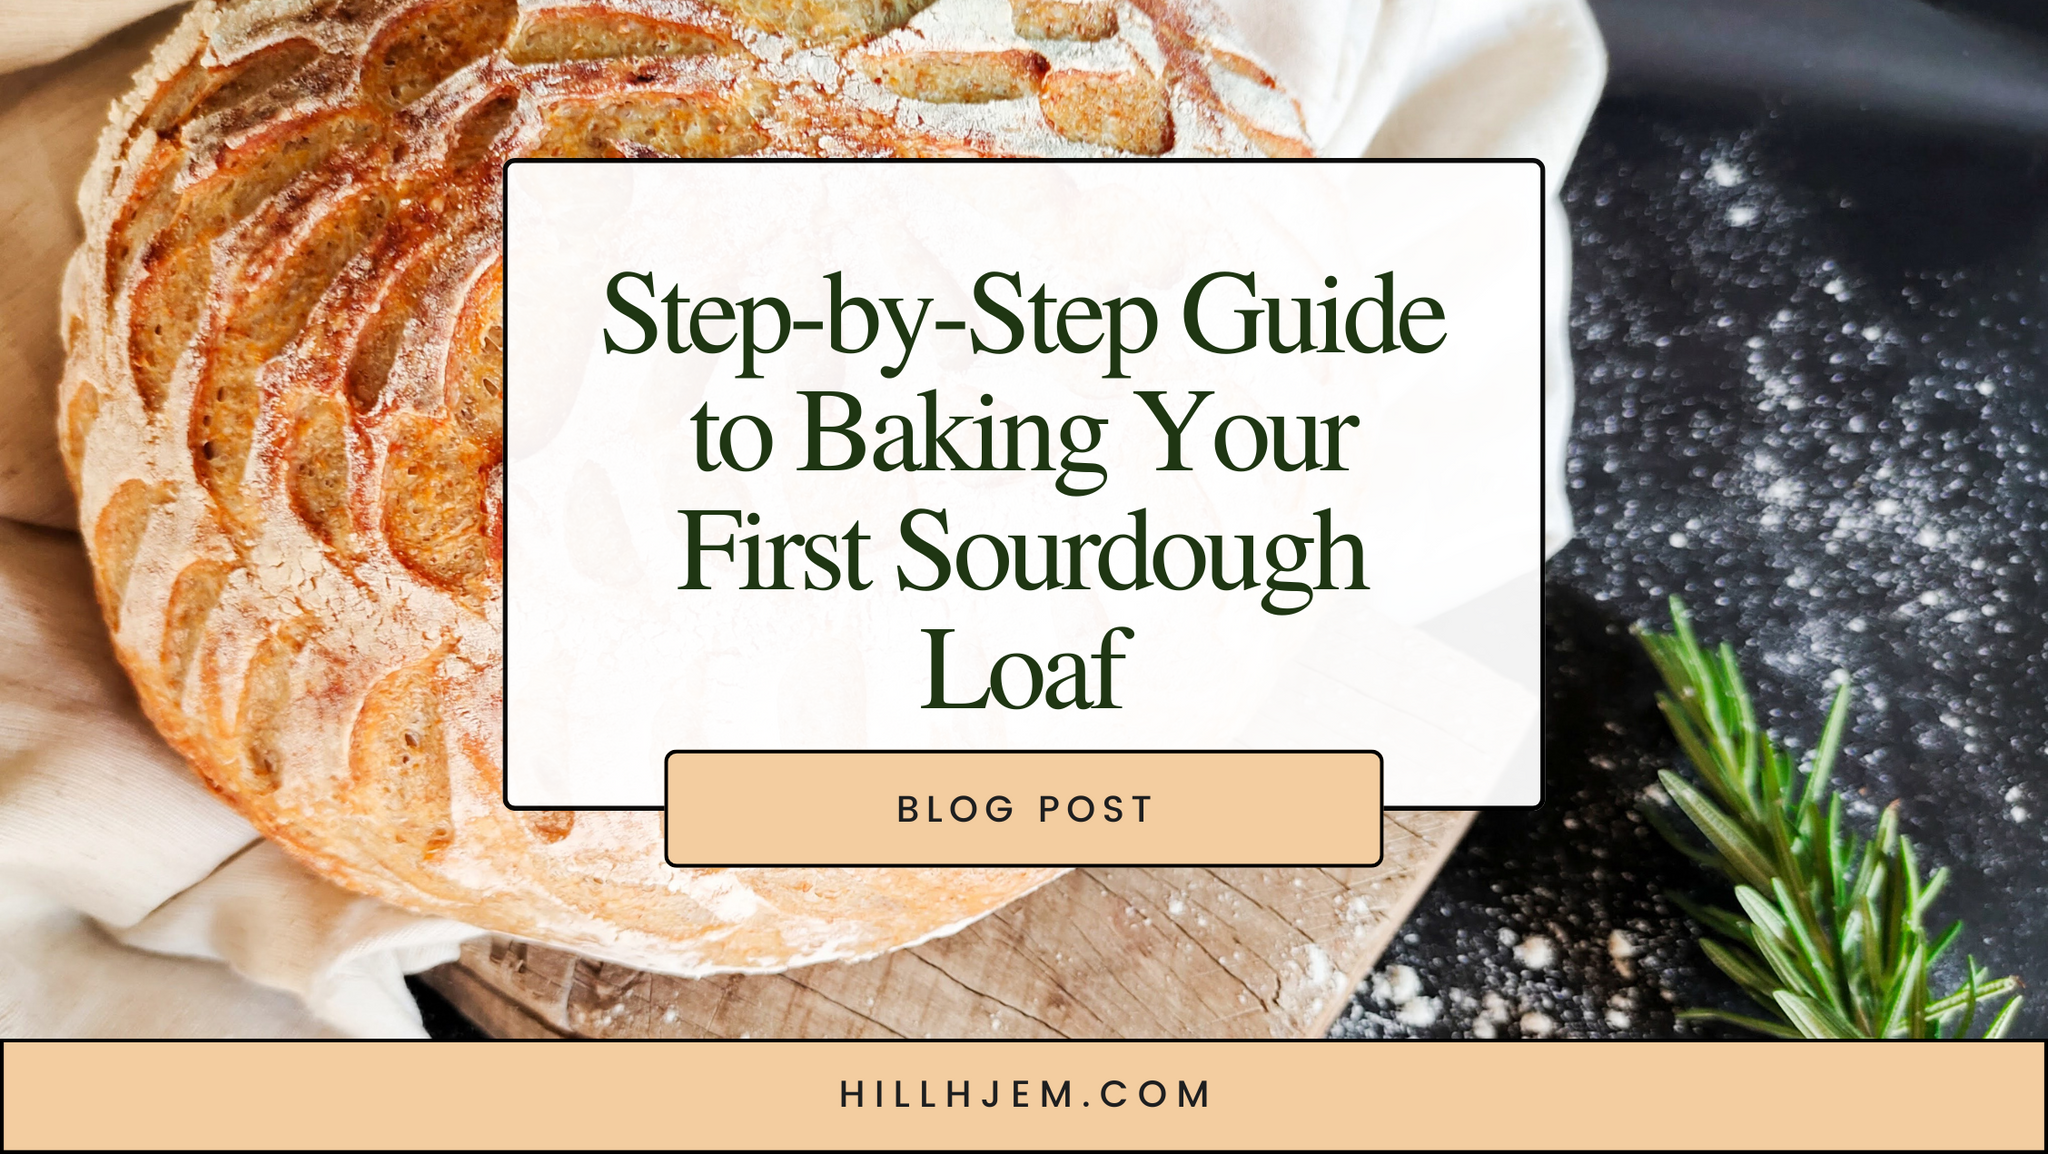 Step-by-Step Guide to Baking Your First Sourdough Loaf